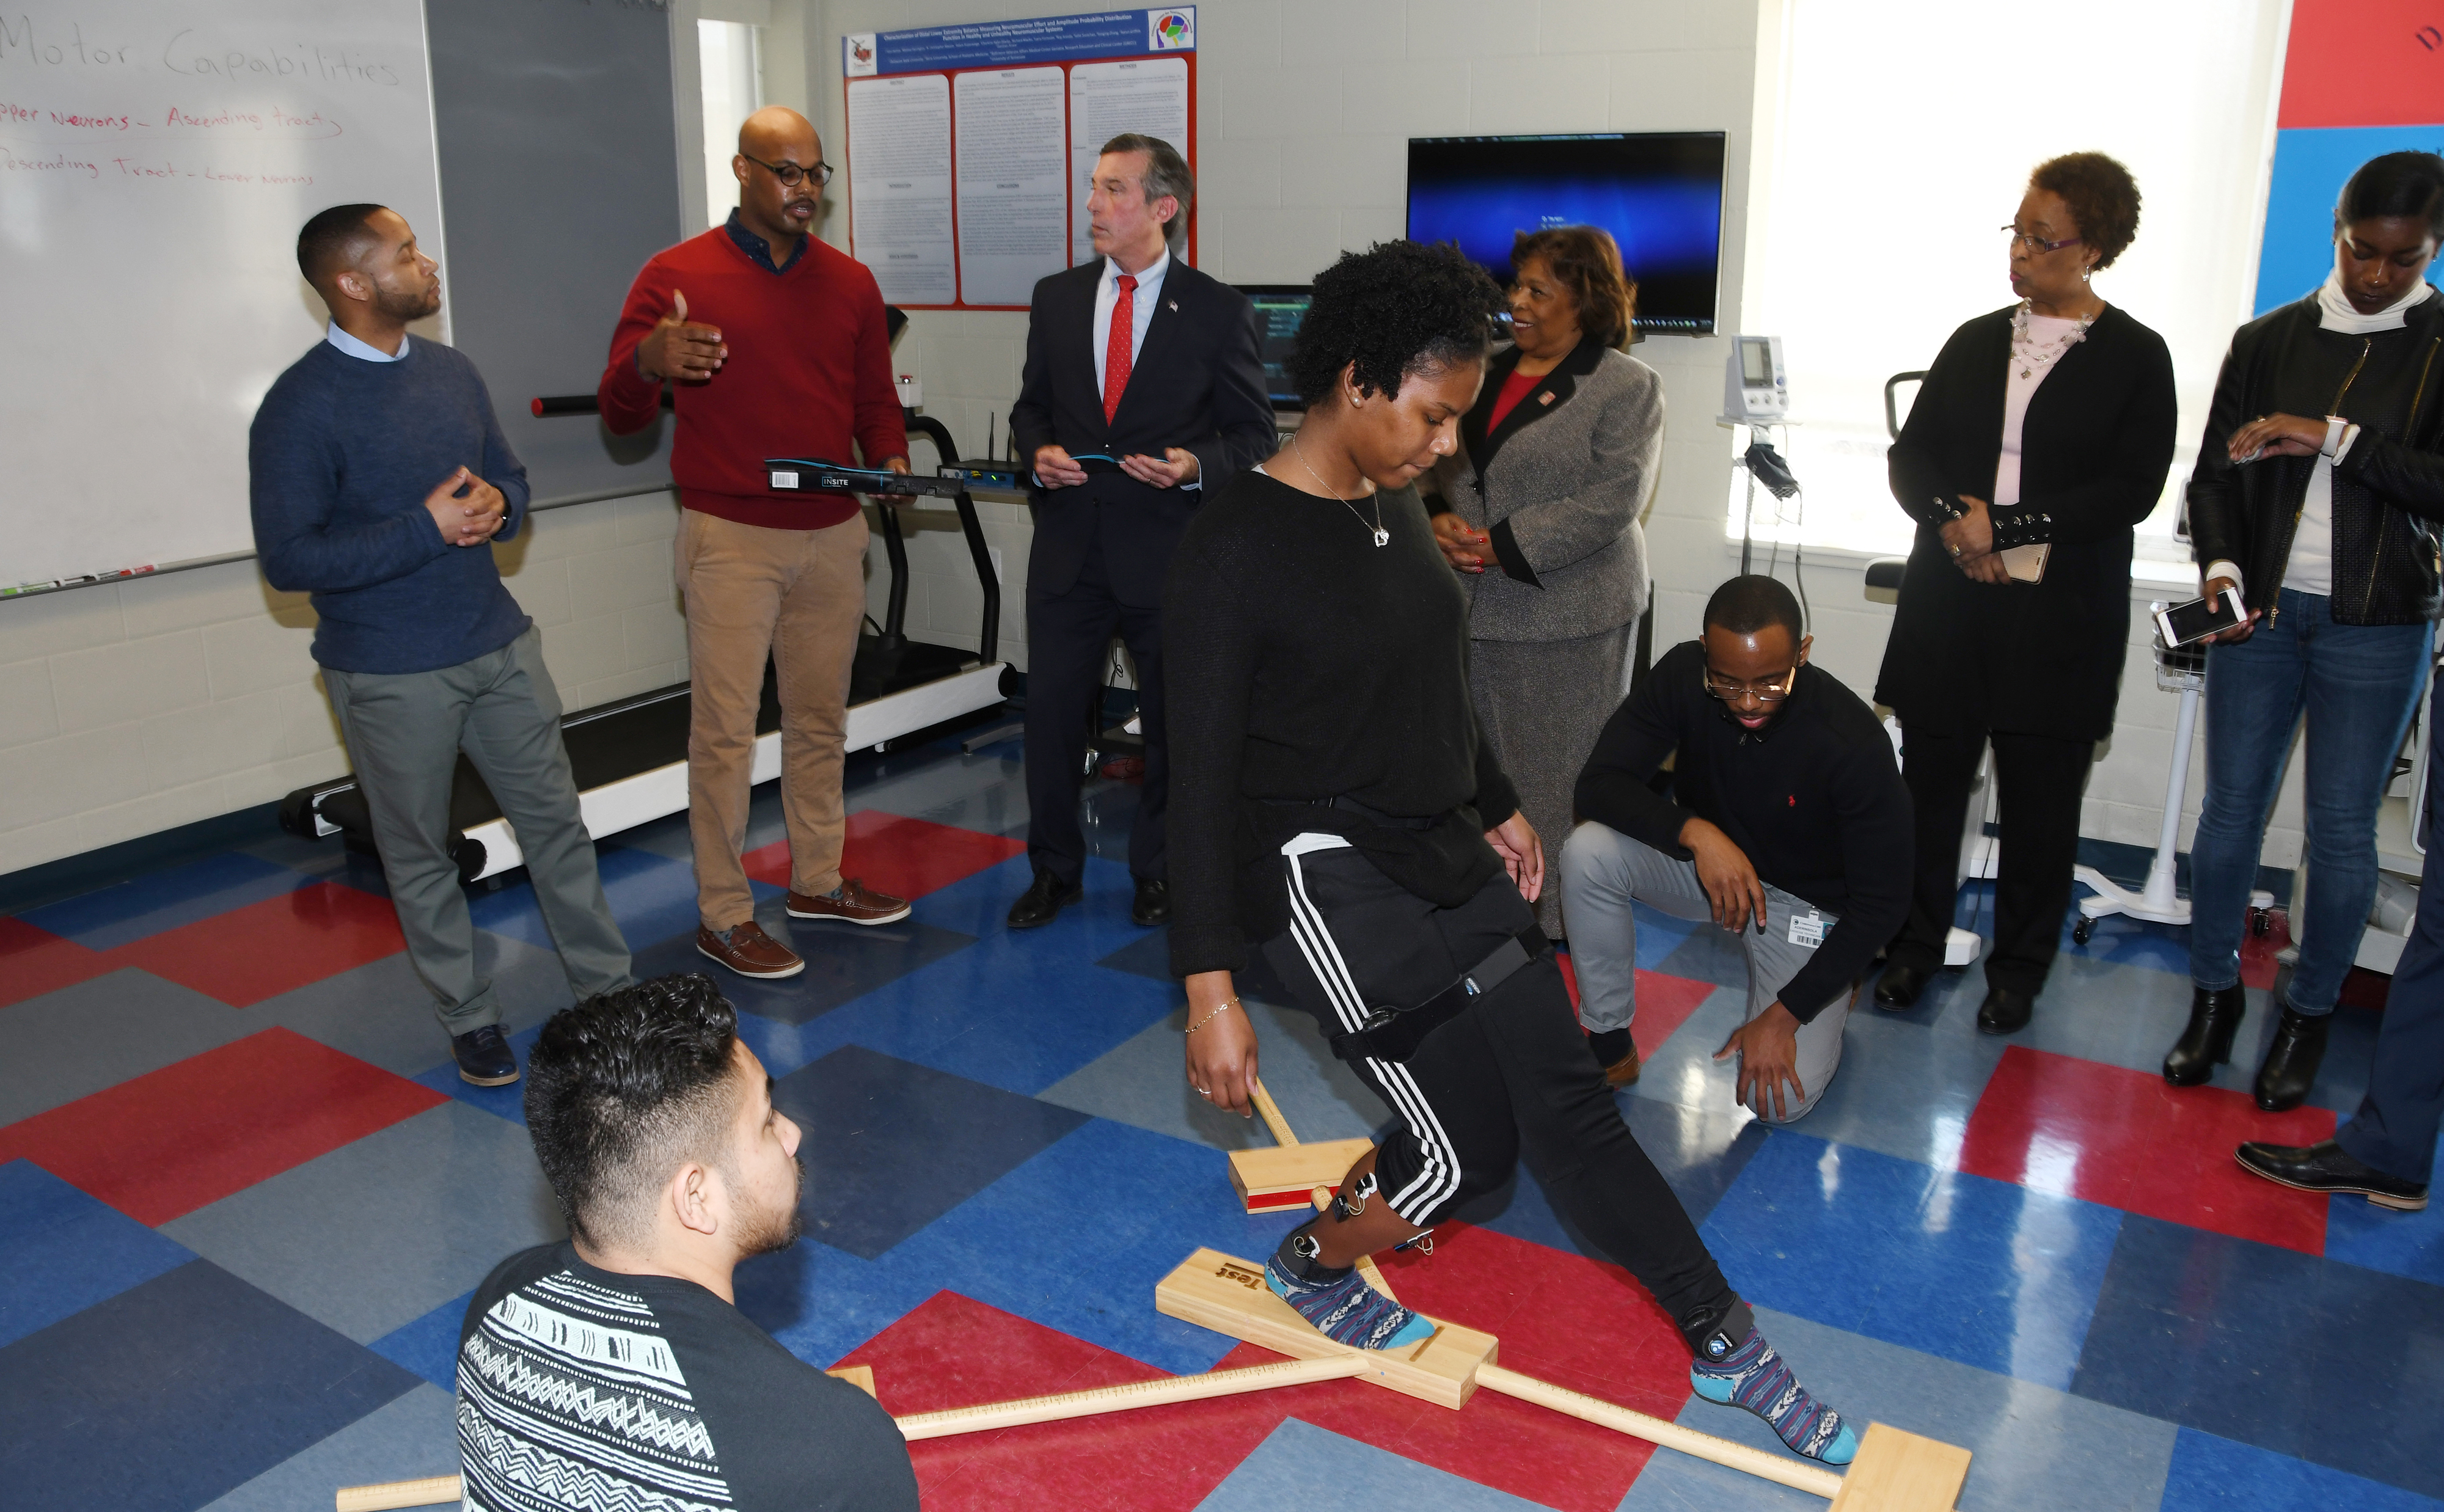 A kinesiology student does movements while electrodes measure electrical activity in her ankle muscles. This predictive injury analysis was part of a Feb. 5 demonstration presented (background l-r) by Dr. Chris Mason and Dr. Von Homer to Gov. John Carney, University President Wilma Mishoe and Dr. Marsha Horton, dean of the College of Health and Behavioral Sciences.